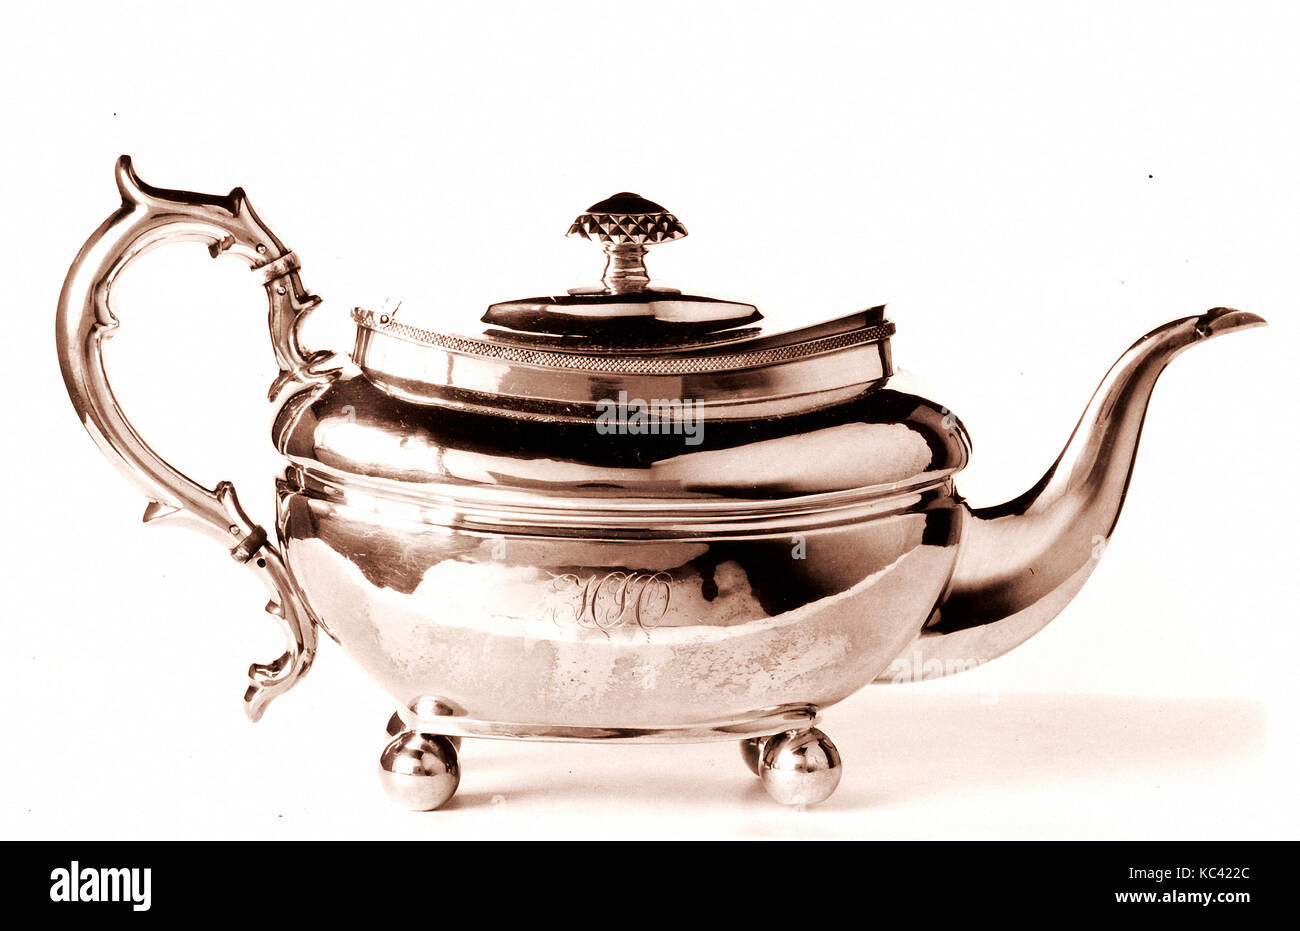 Teapot, ca. 1810, Made in New York, New York, United States, American, Silver, 6 5/8 x 12 15/16 x 5 3/8 in. (16.8 x 32.9 x 13.7 Stock Photo